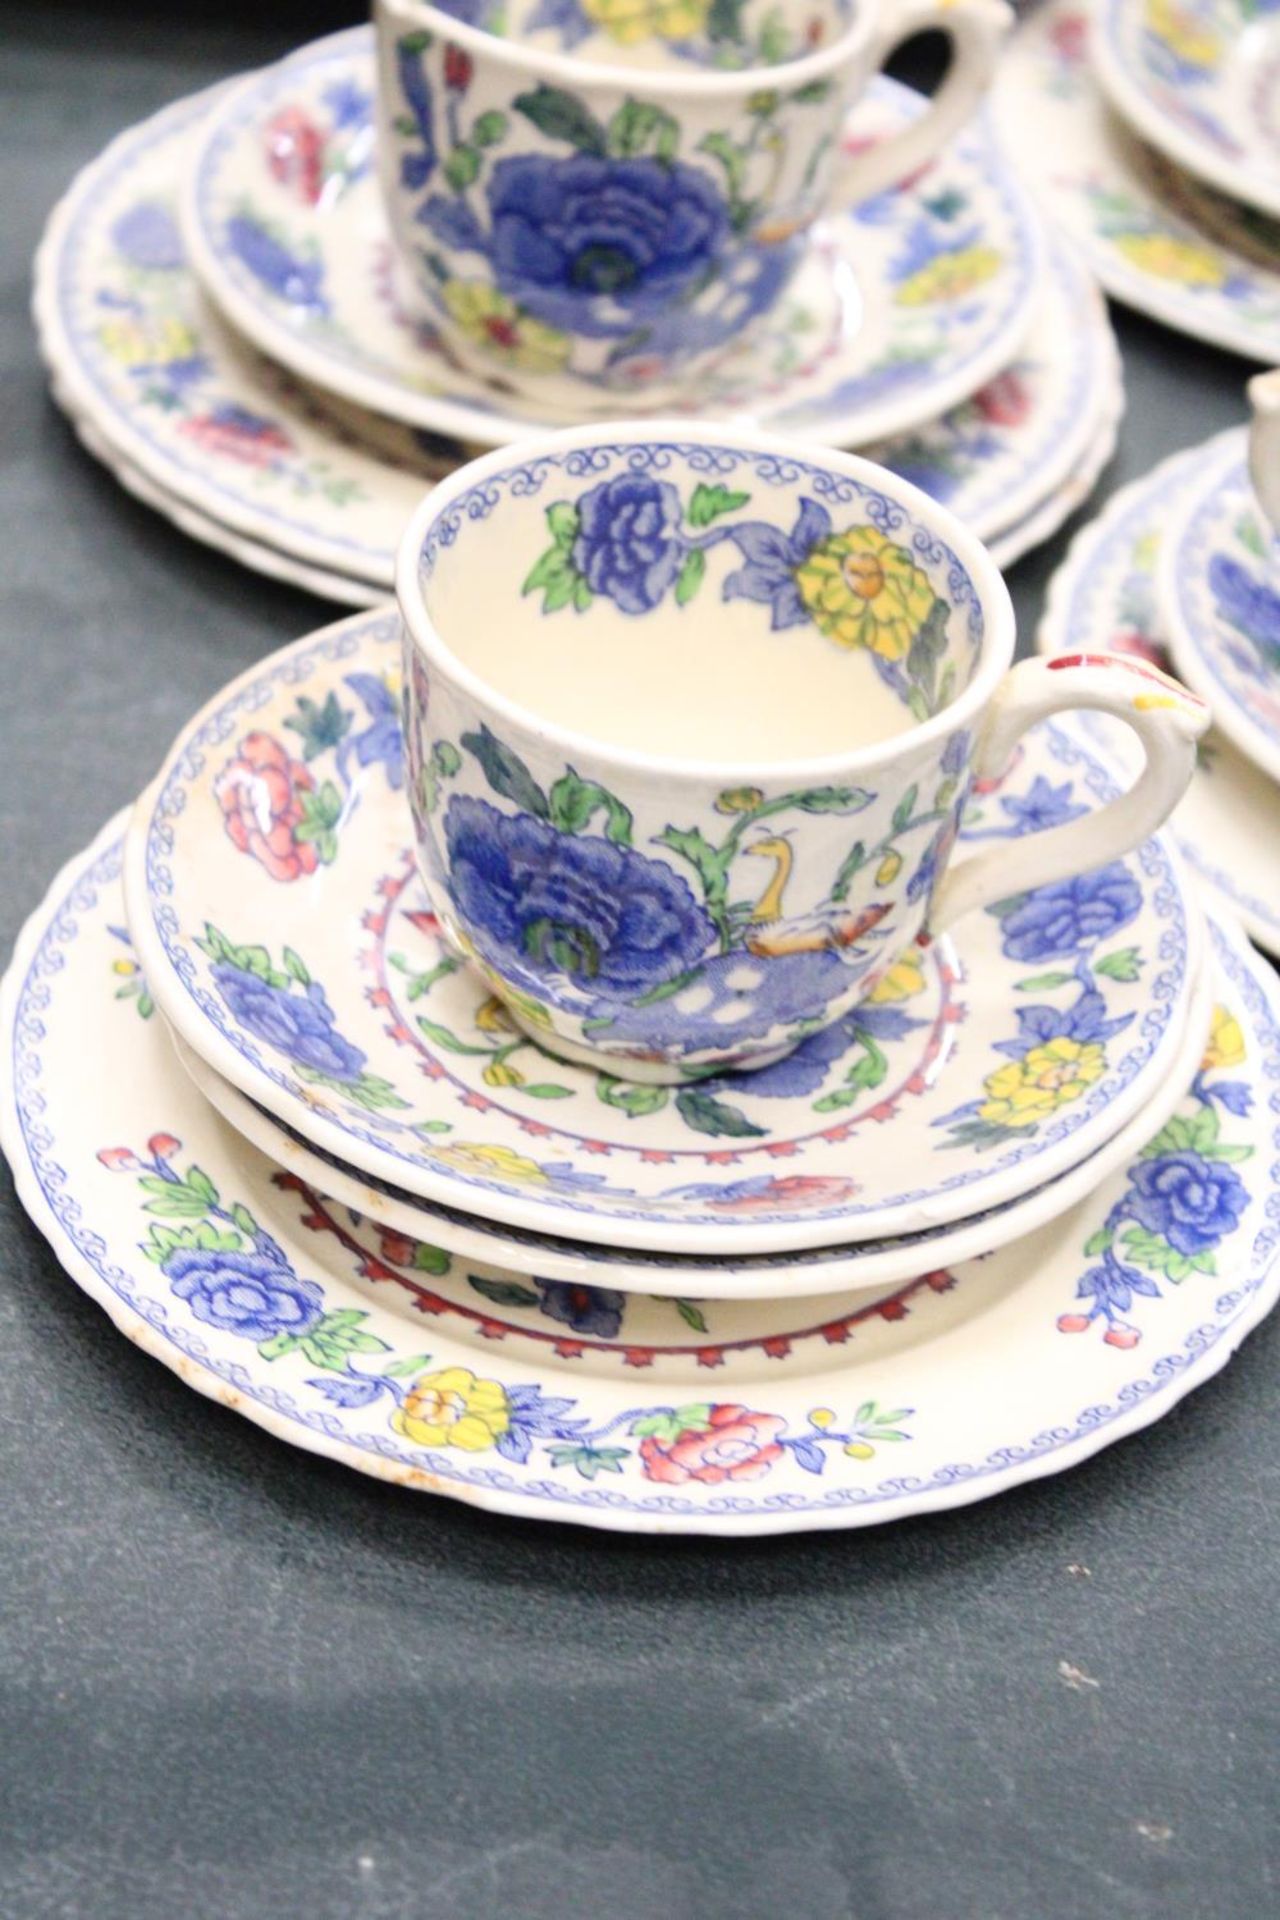 A QUANTITY OF MASONS "REGENCY" WARE TO INCLUDE A TEAPOT, CUPS, SAUCERS, PLATES ETC - Image 2 of 5